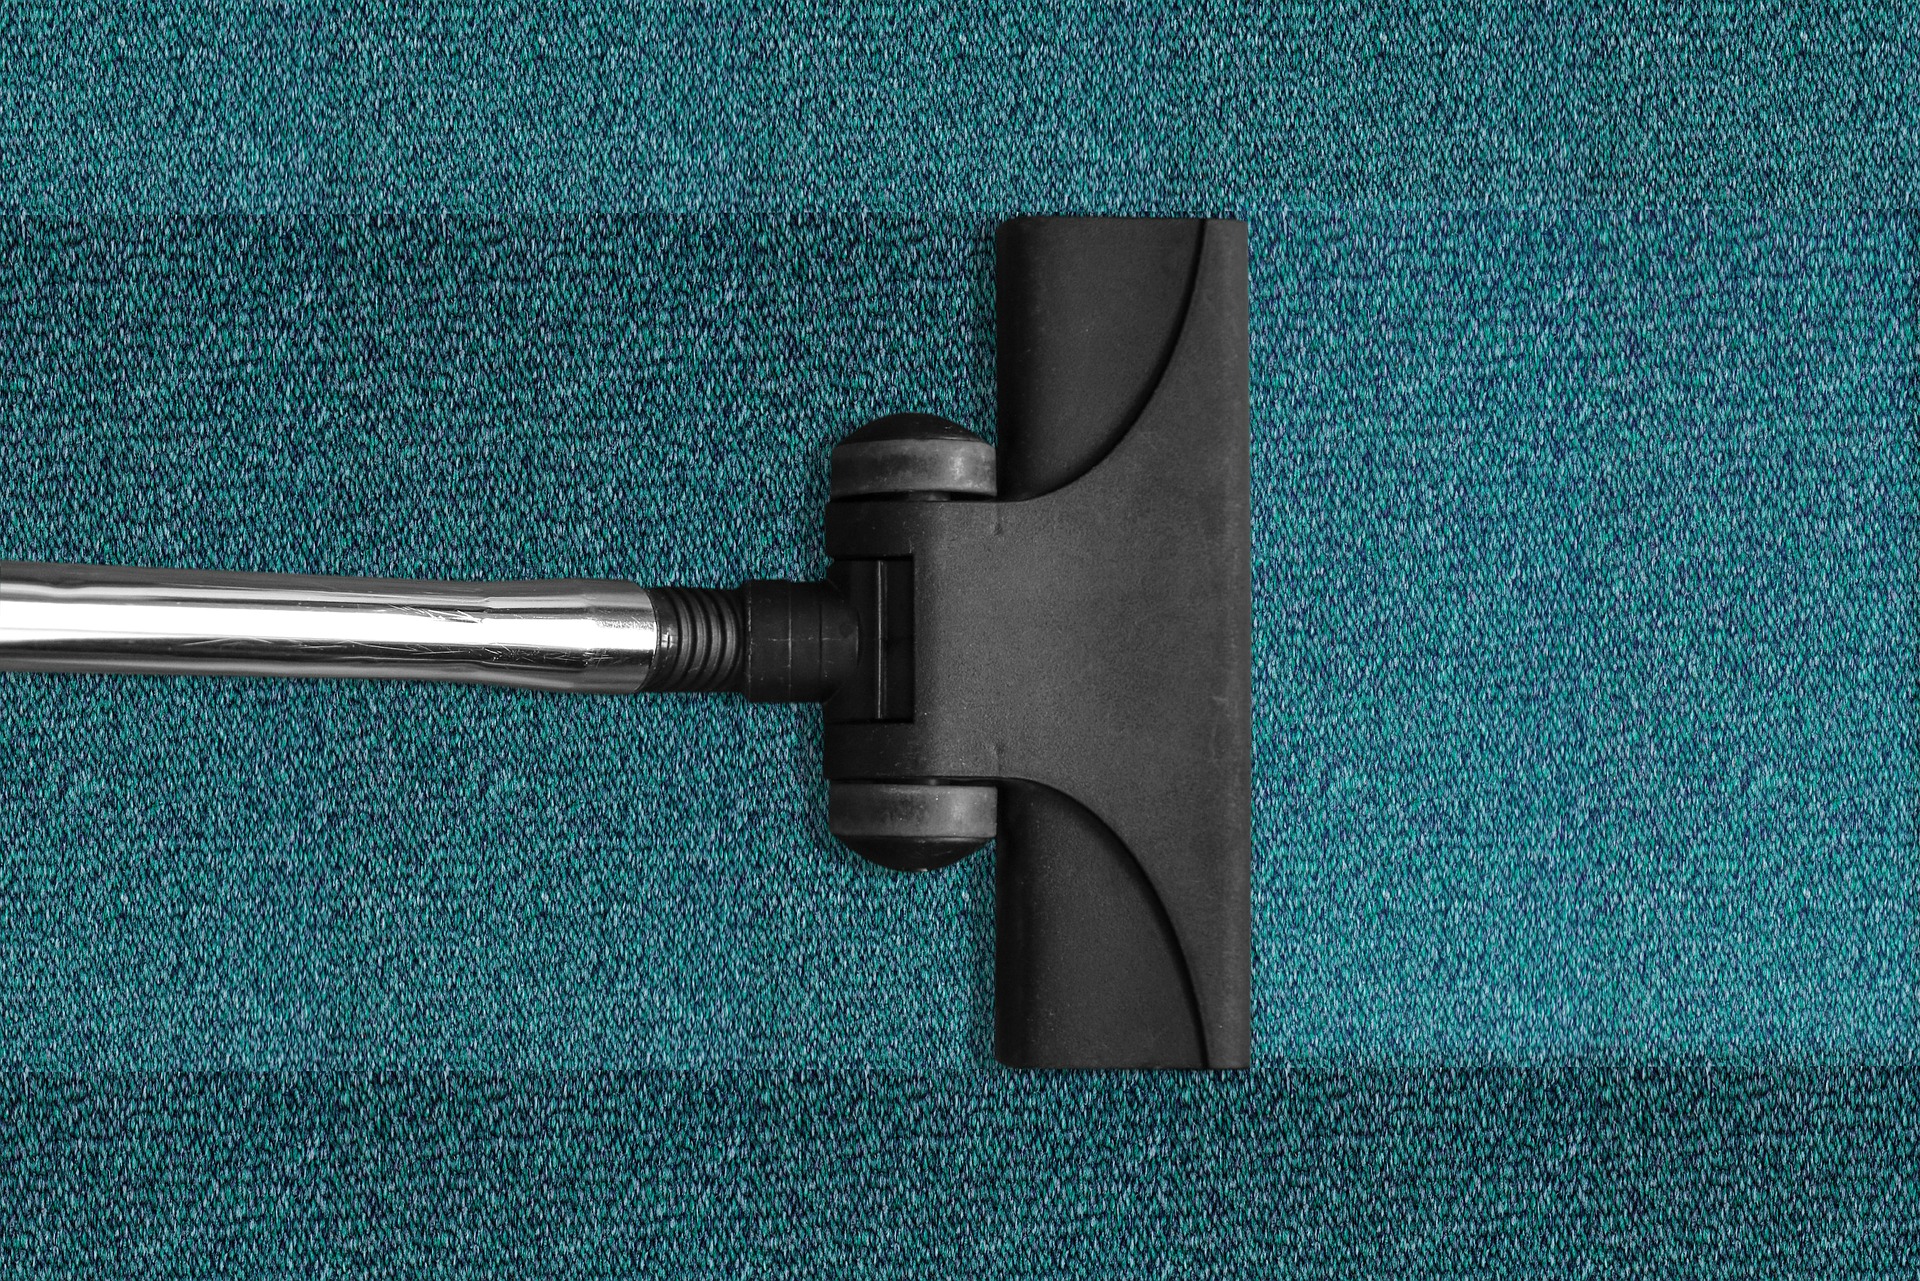 A vacuum cleaner leaving a visible result on a carpet